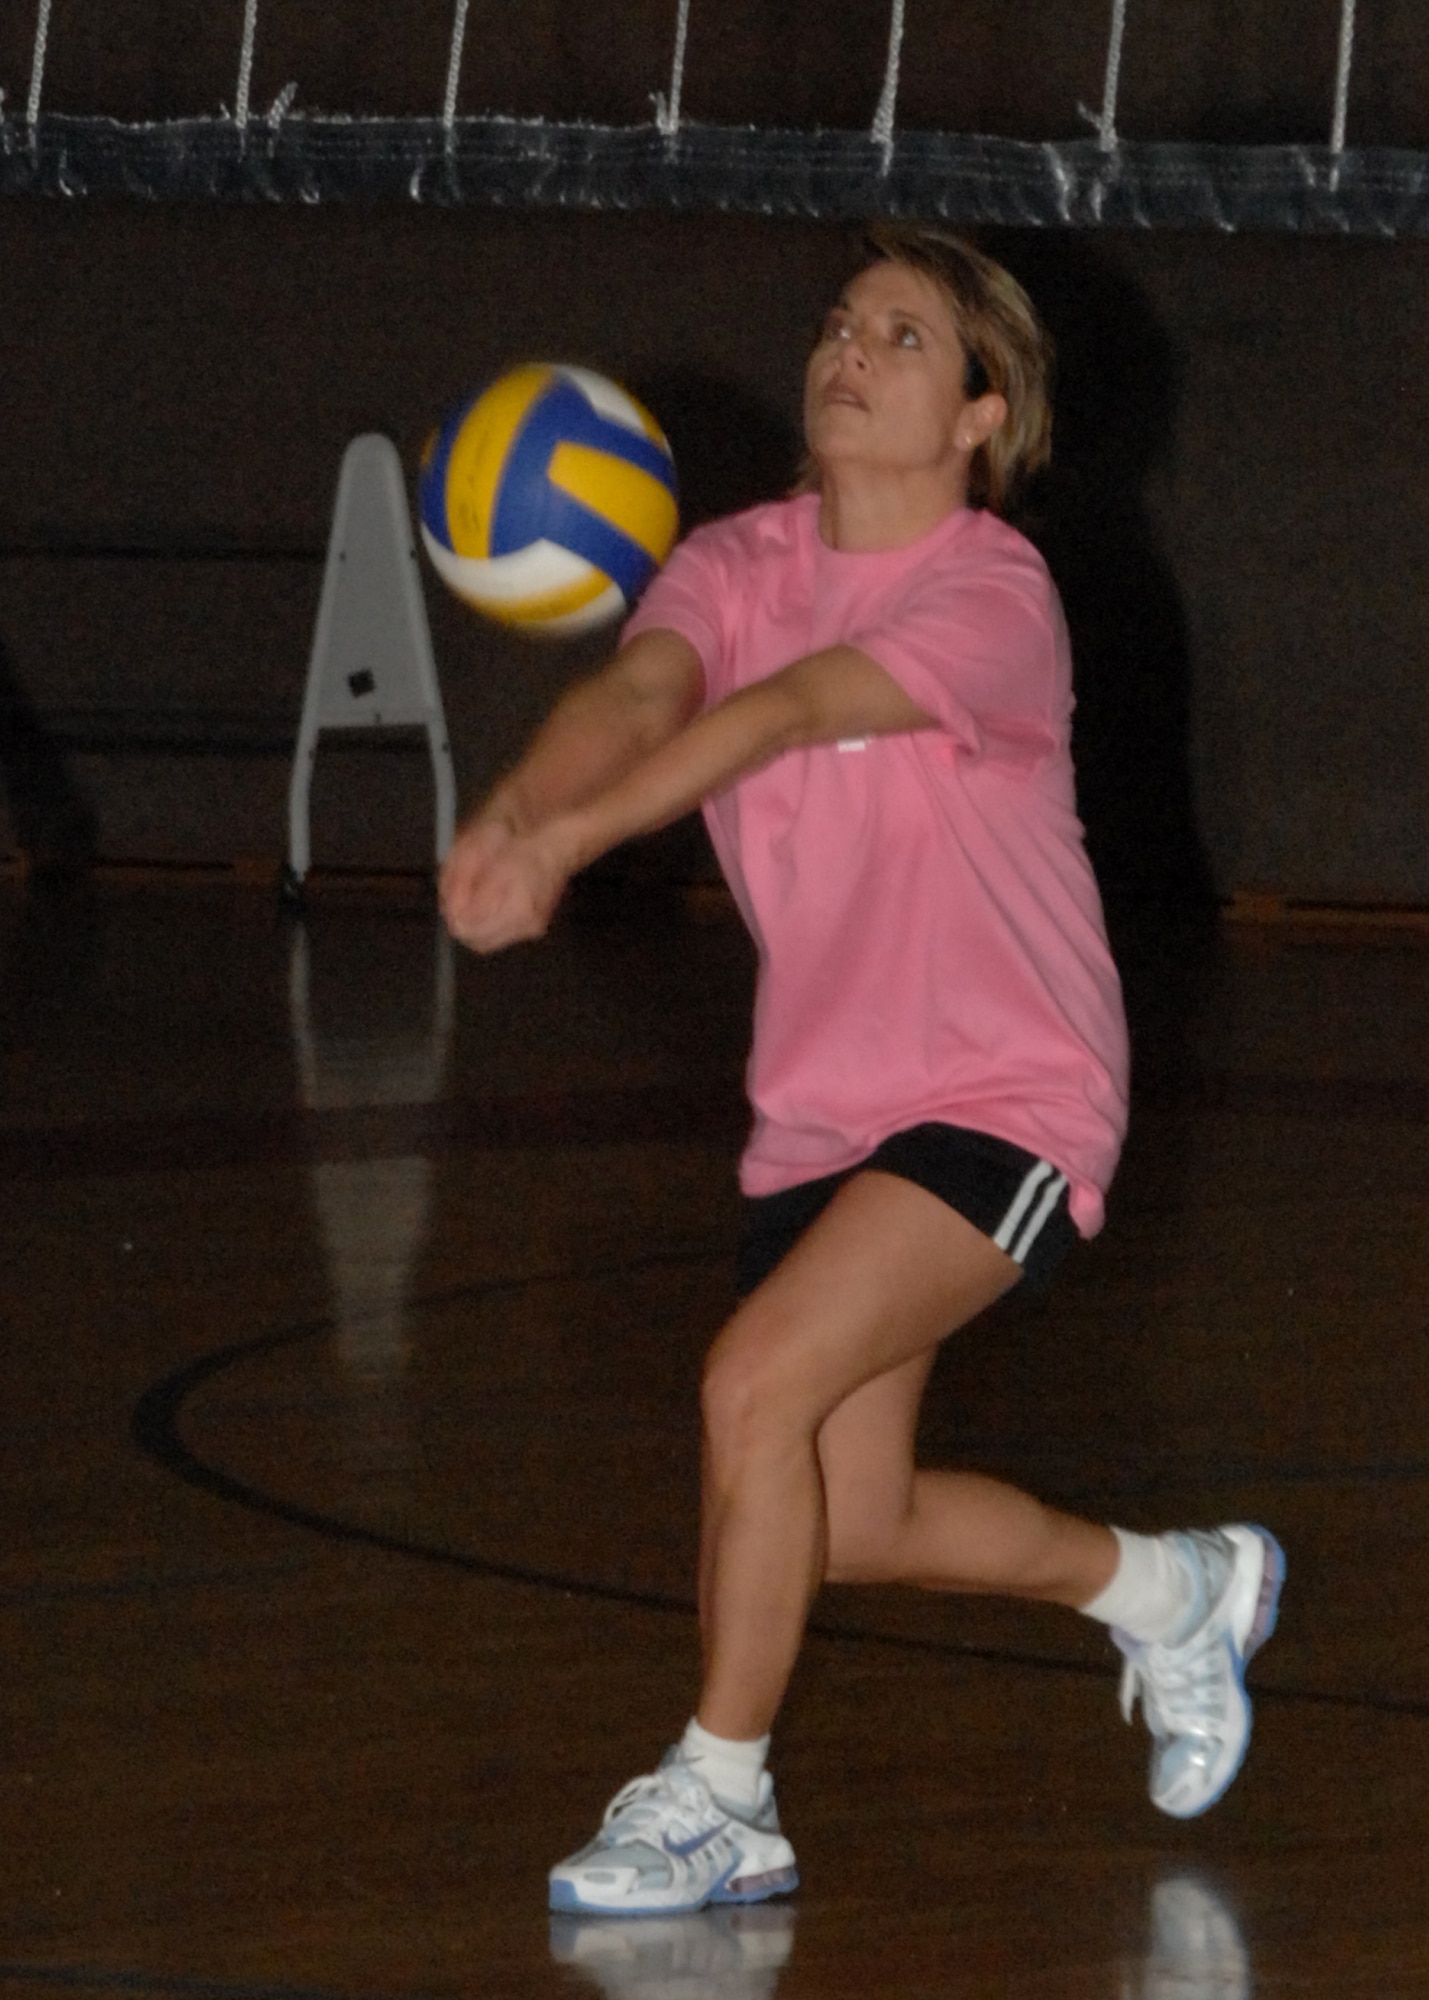 SPANGDAHLEM AIR BASE, Germany – Tech Sgt. Amanda Hendrix, Area Defense Council, sets the ball for the Tier II team in the volleyball game against the Top 3 at the Skelton Memorial Fitness Center Jan. 25, 2008. (U.S. Air Force photo/Airman 1st Class Jenifer Calhoun)